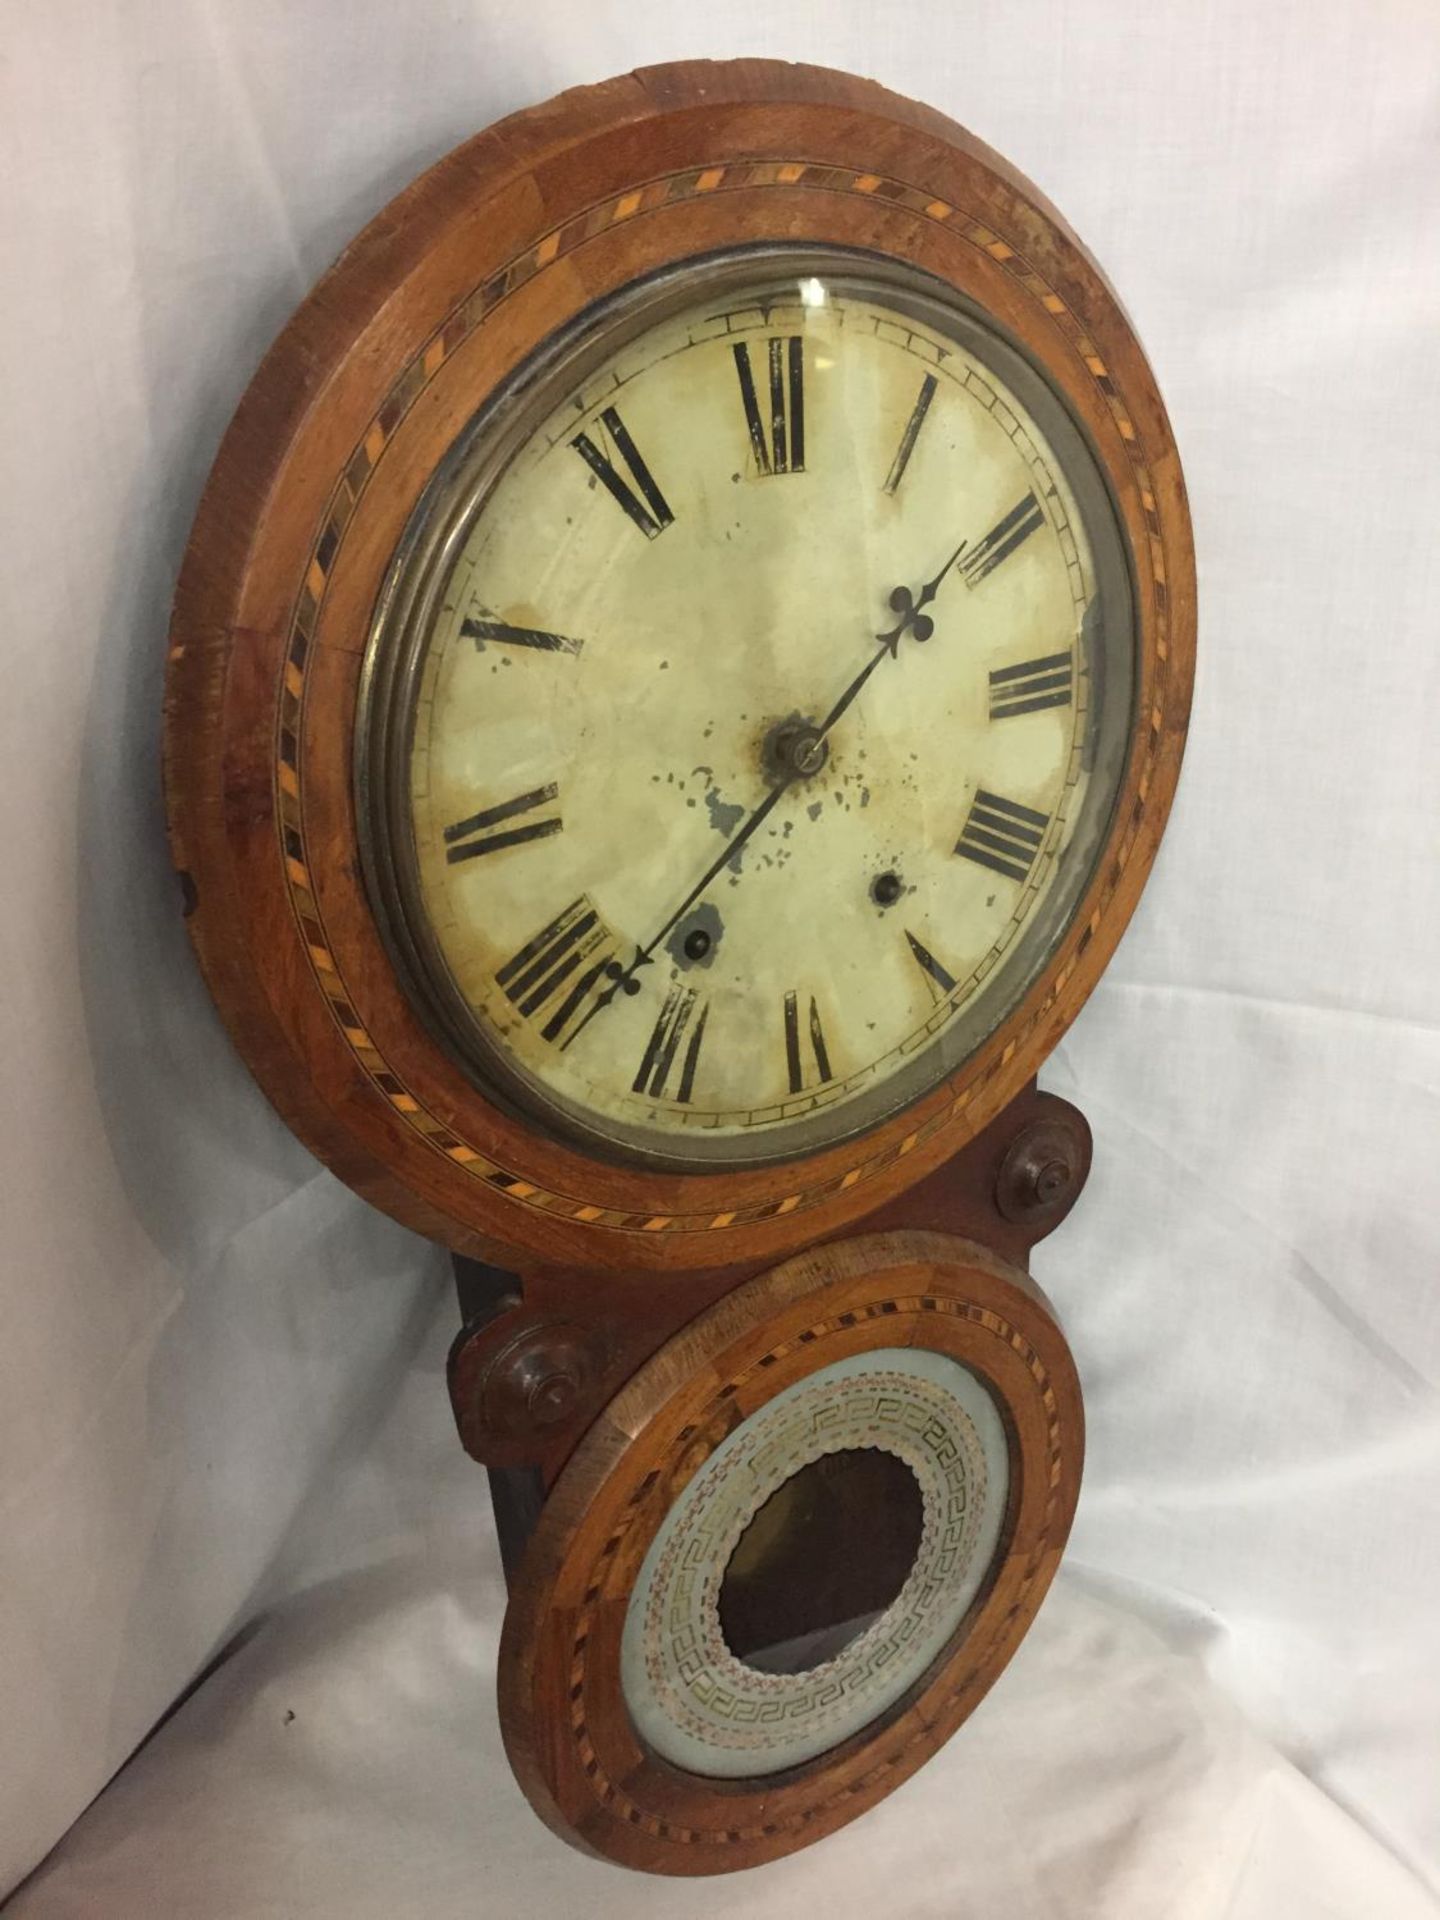 AN INLAID AMERICAN WALL CLOCK - Image 2 of 4